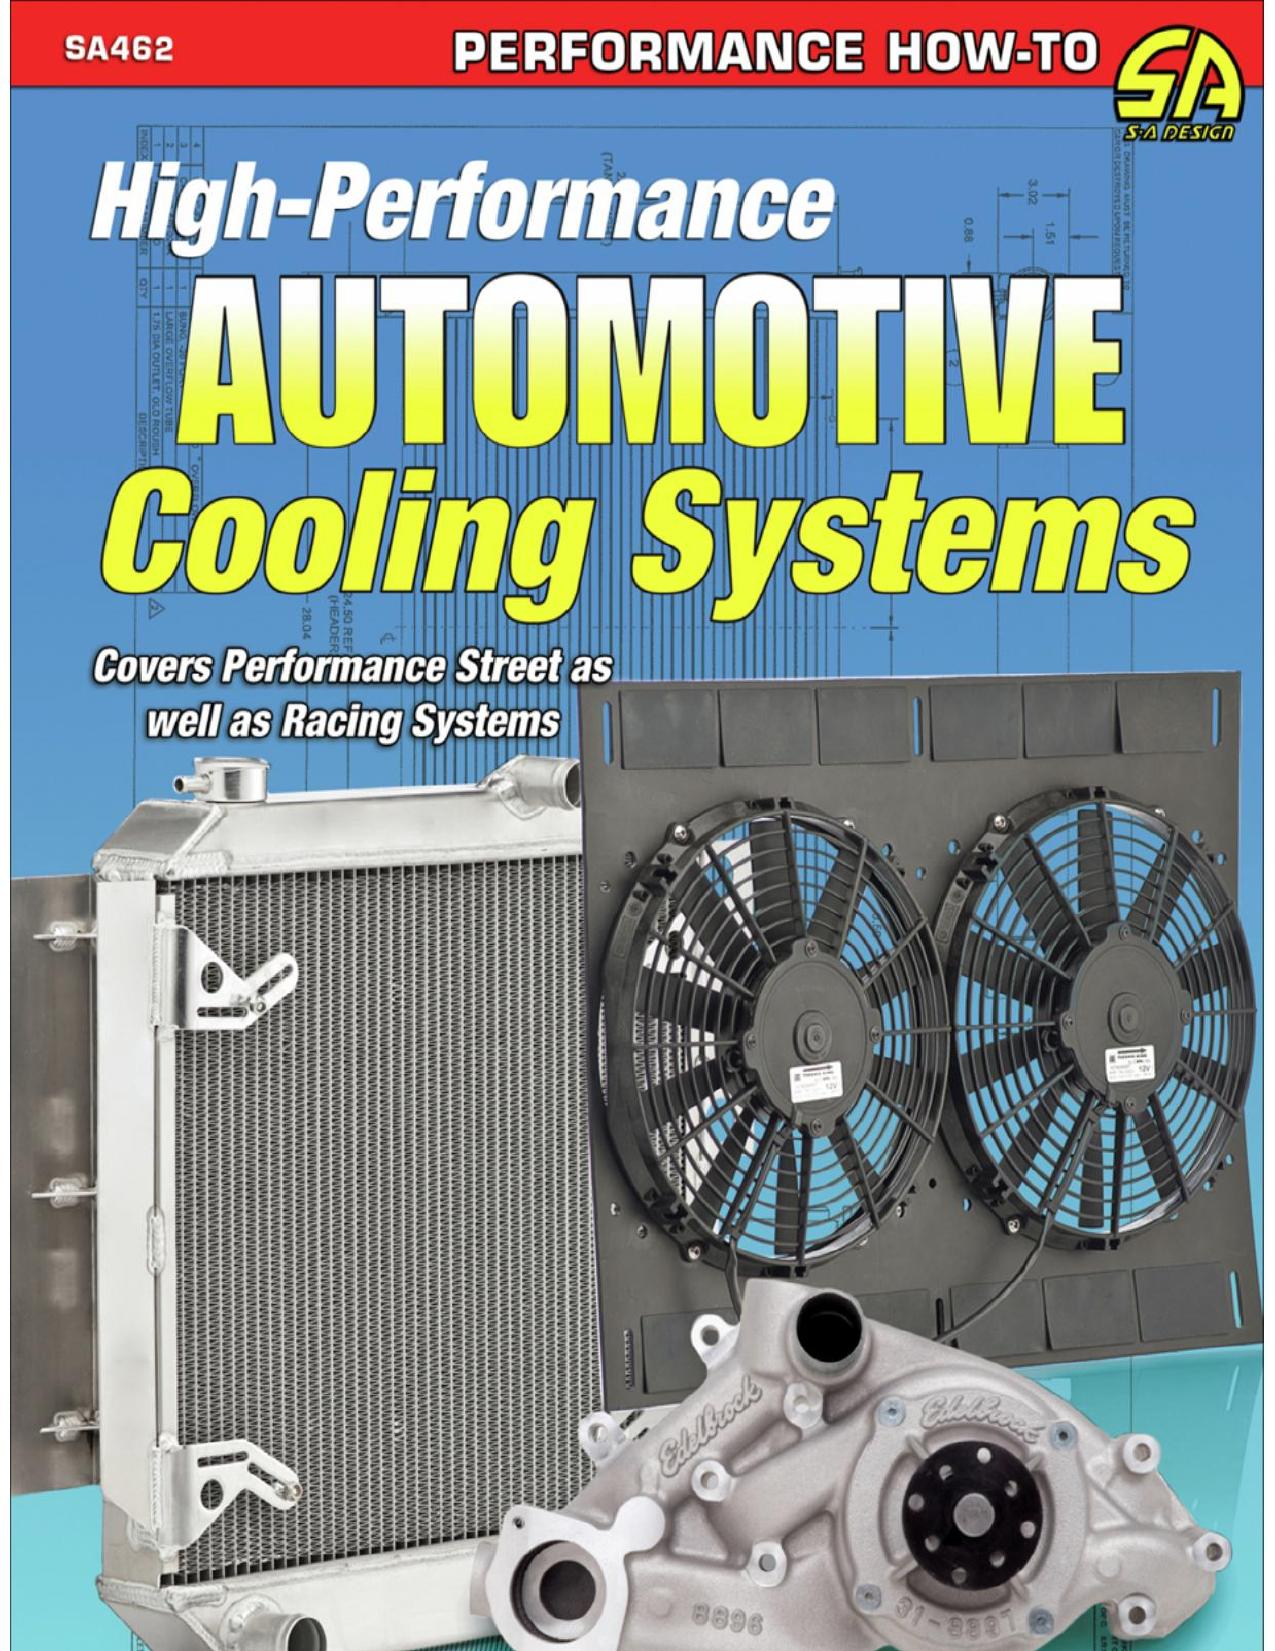 High-Performance Automotive Cooling Systems by John Kershaw;